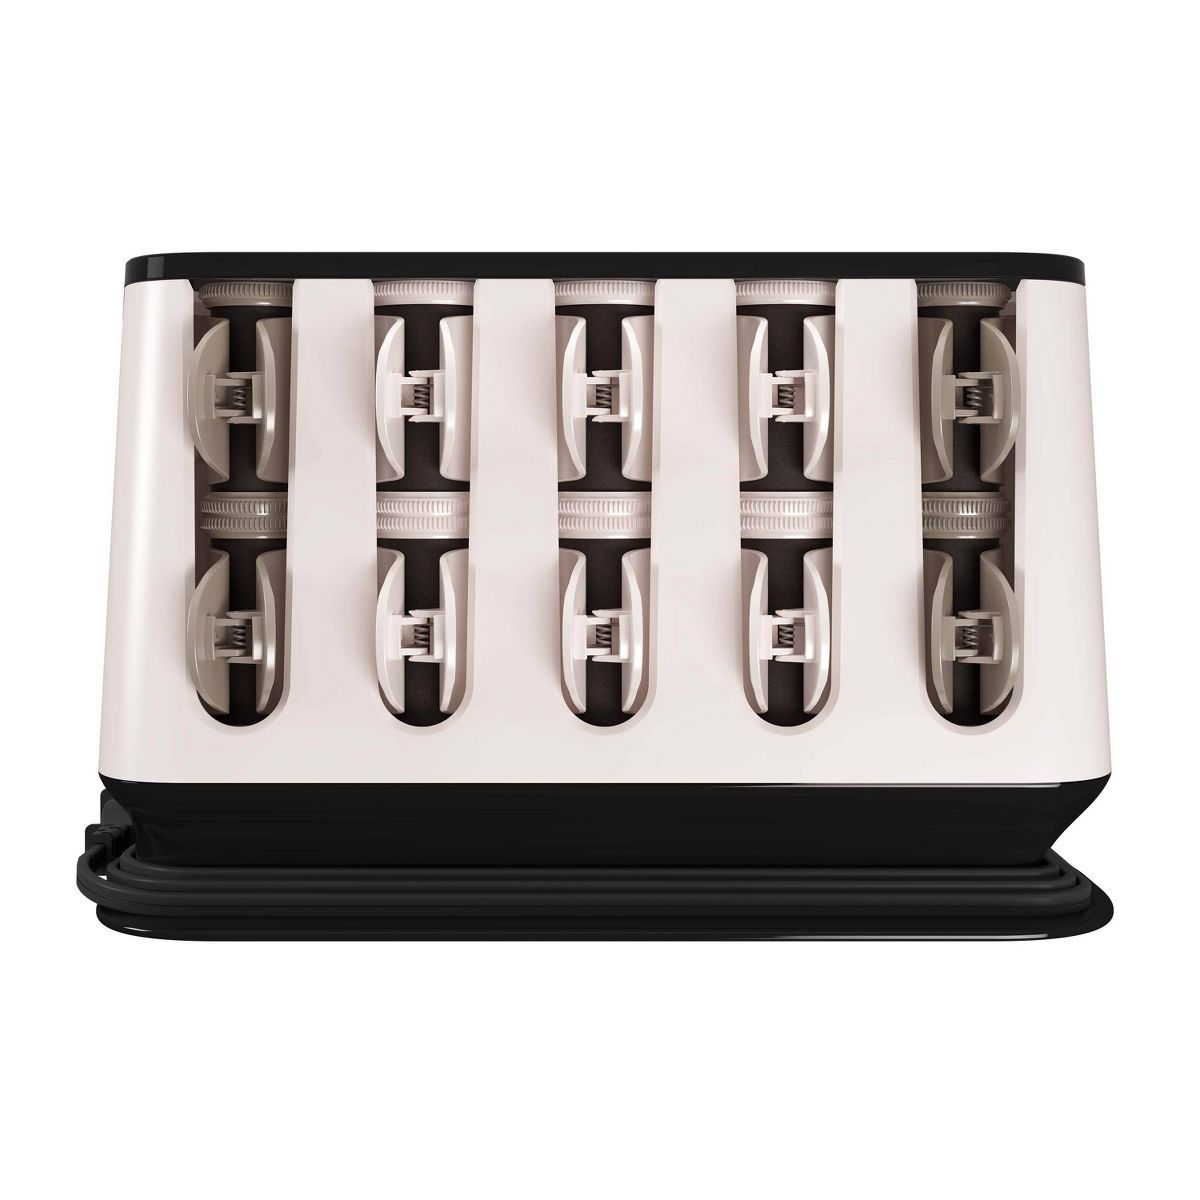 Remington Shine Therapy Hot Rollers - 20ct | Target